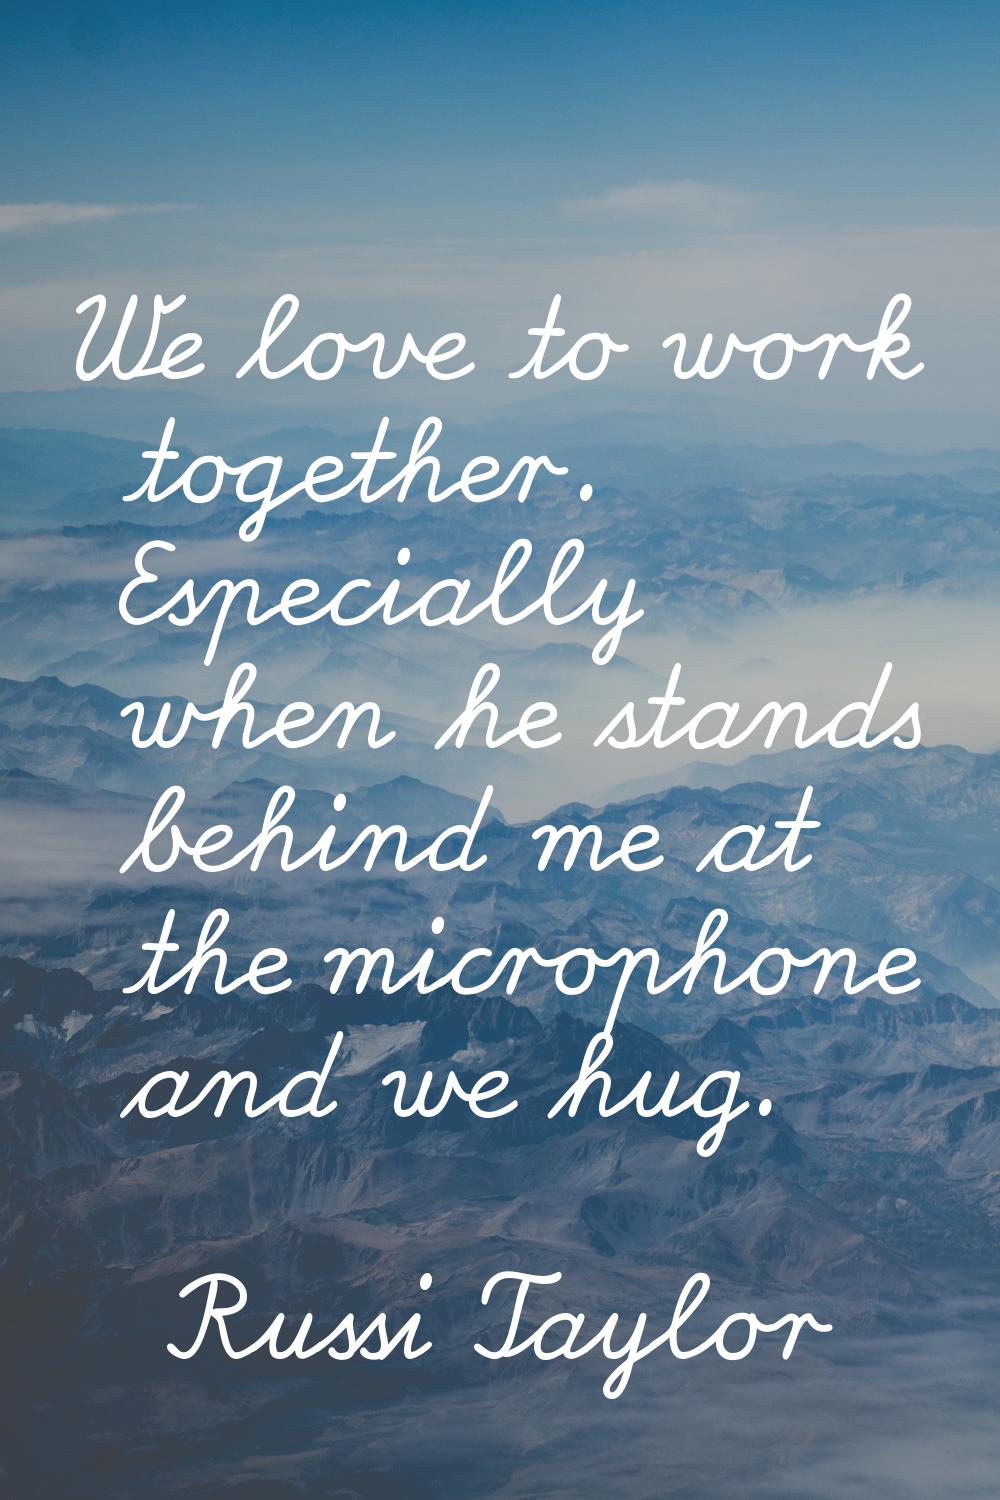 We love to work together. Especially when he stands behind me at the microphone and we hug.